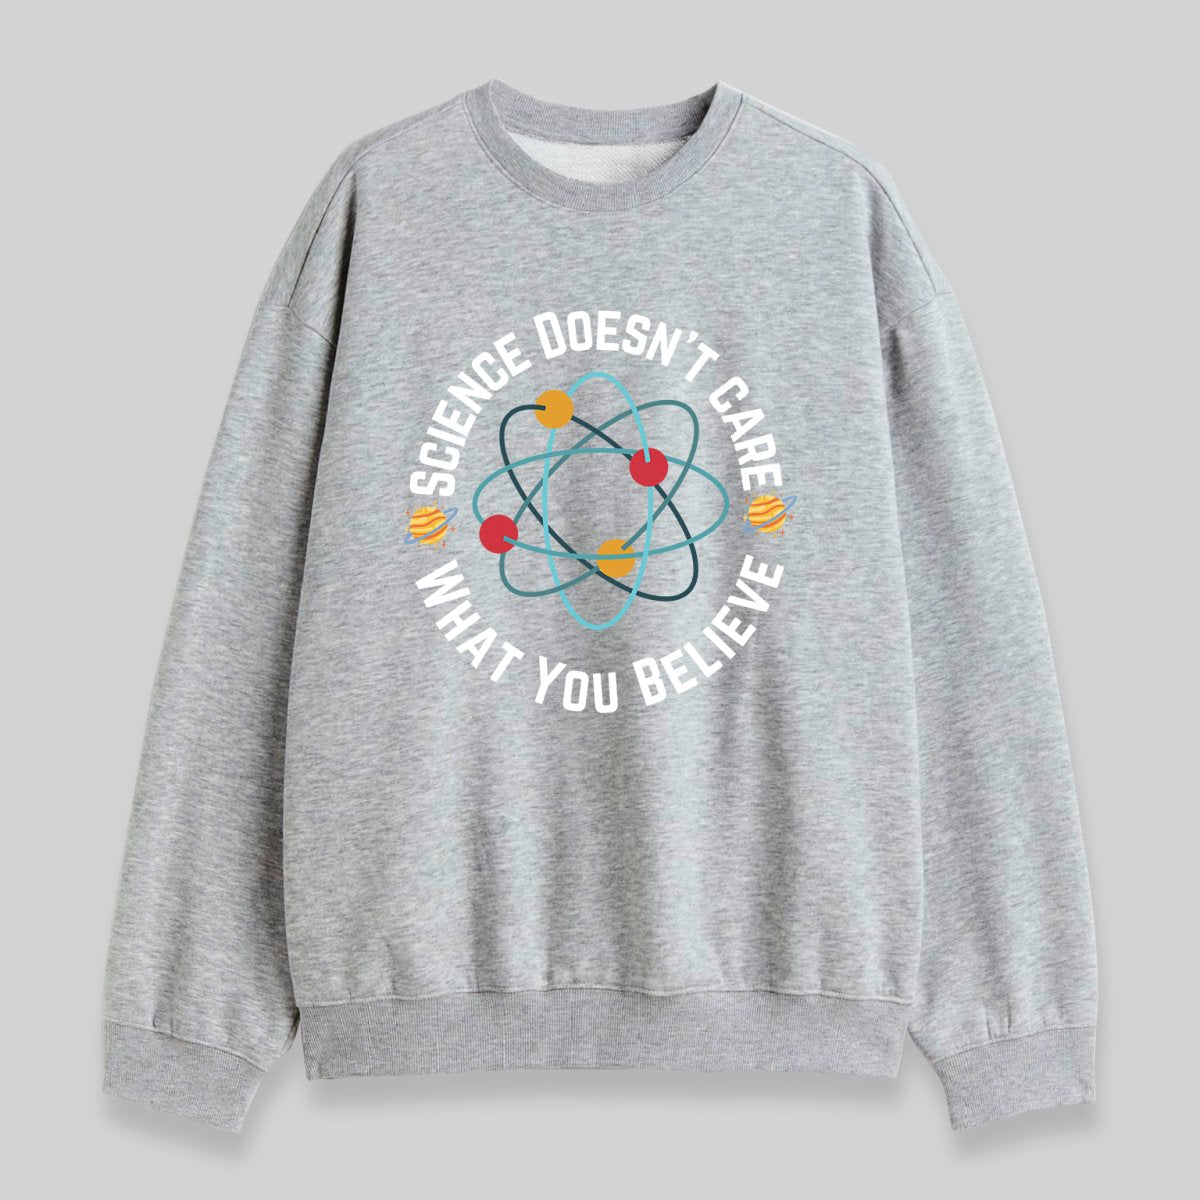 Science Doesn't Care What You Believe Sweatshirt - Geeksoutfit